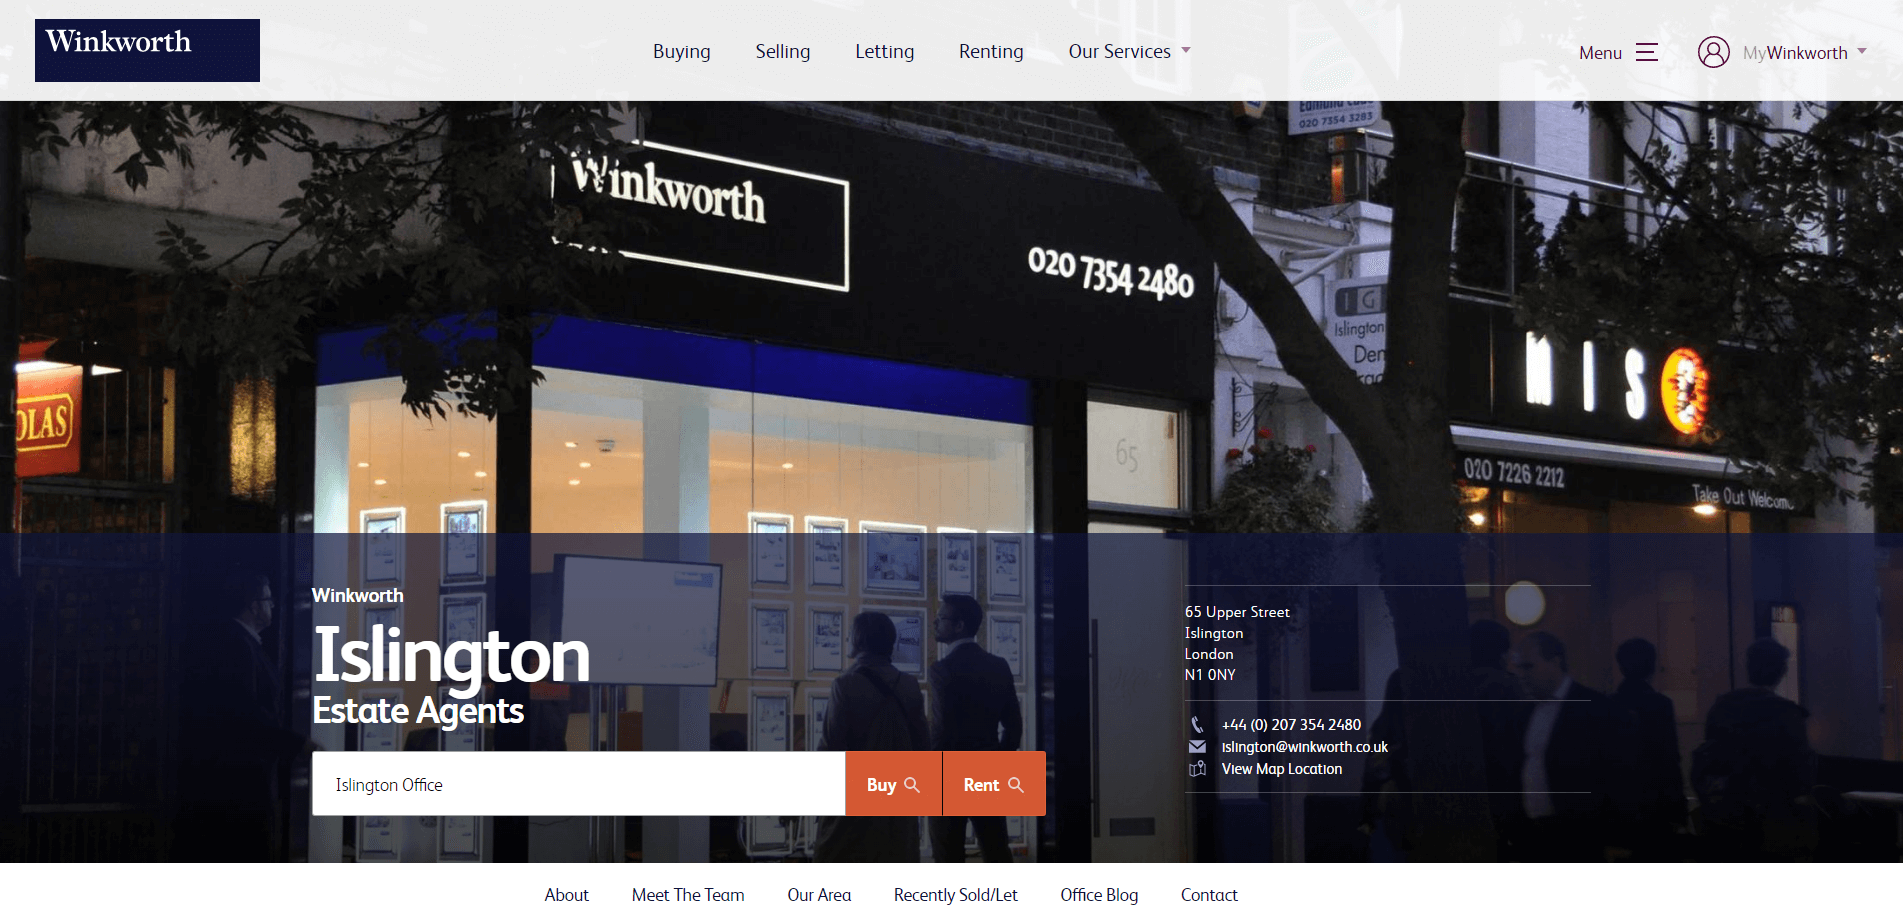  We made a list of the 101 best real estate websites.  We reviewed each site and ranked them 1-101.  Here's winkworth.co.uk.  Curious who made the cut? 